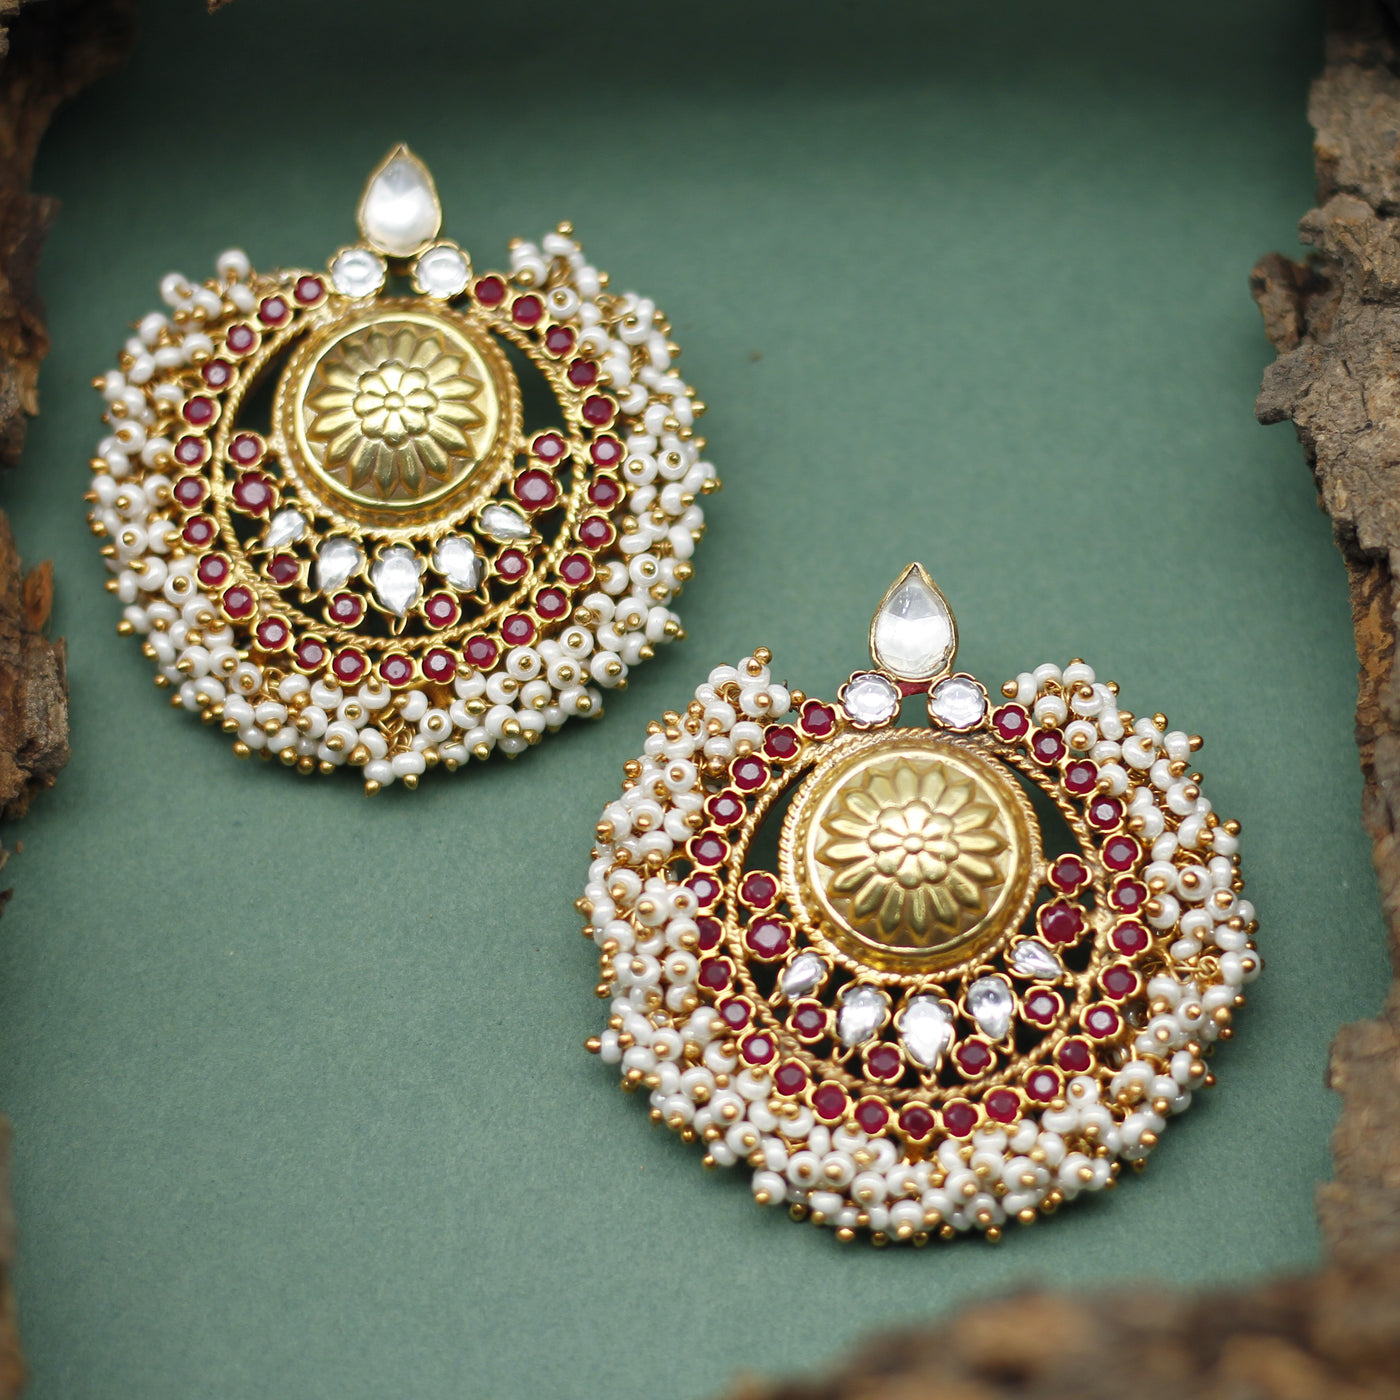 Tamanna Bhatia in Silver Handcrafted Earrings